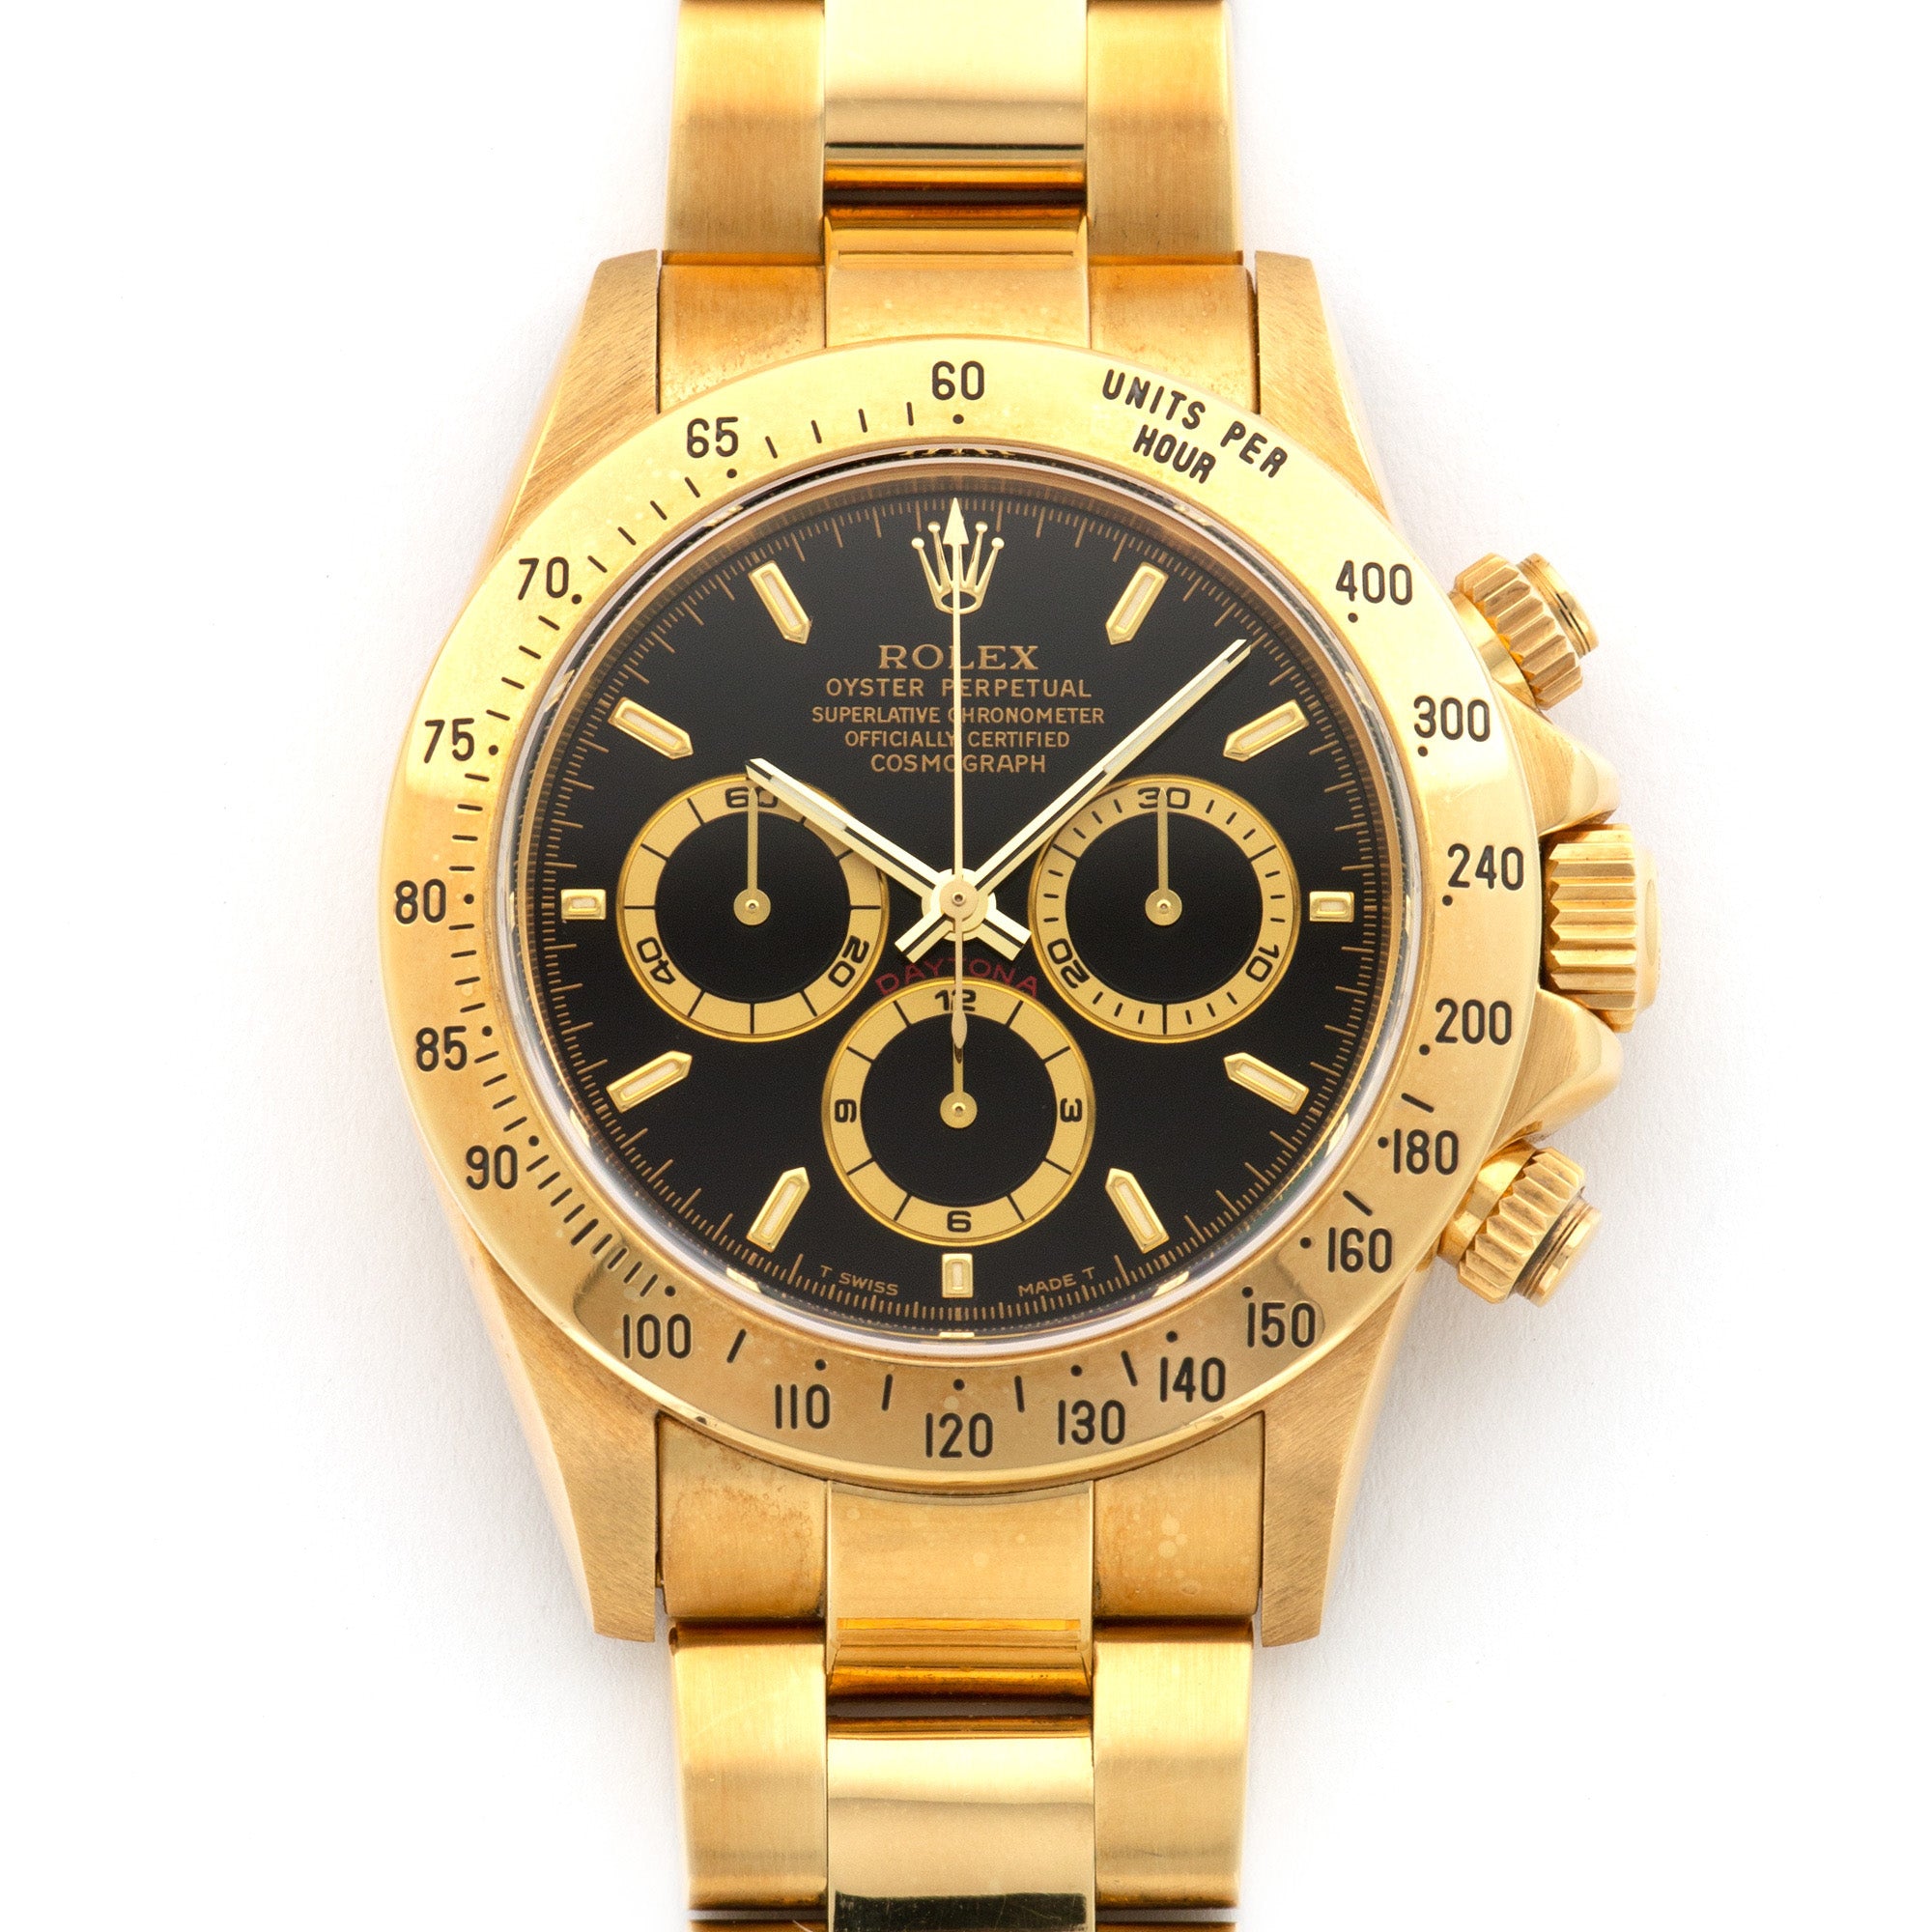 Rolex - Rolex Yellow Gold Cosmograph Daytona Watch Ref. 16528 with Original Box and Papers - The Keystone Watches